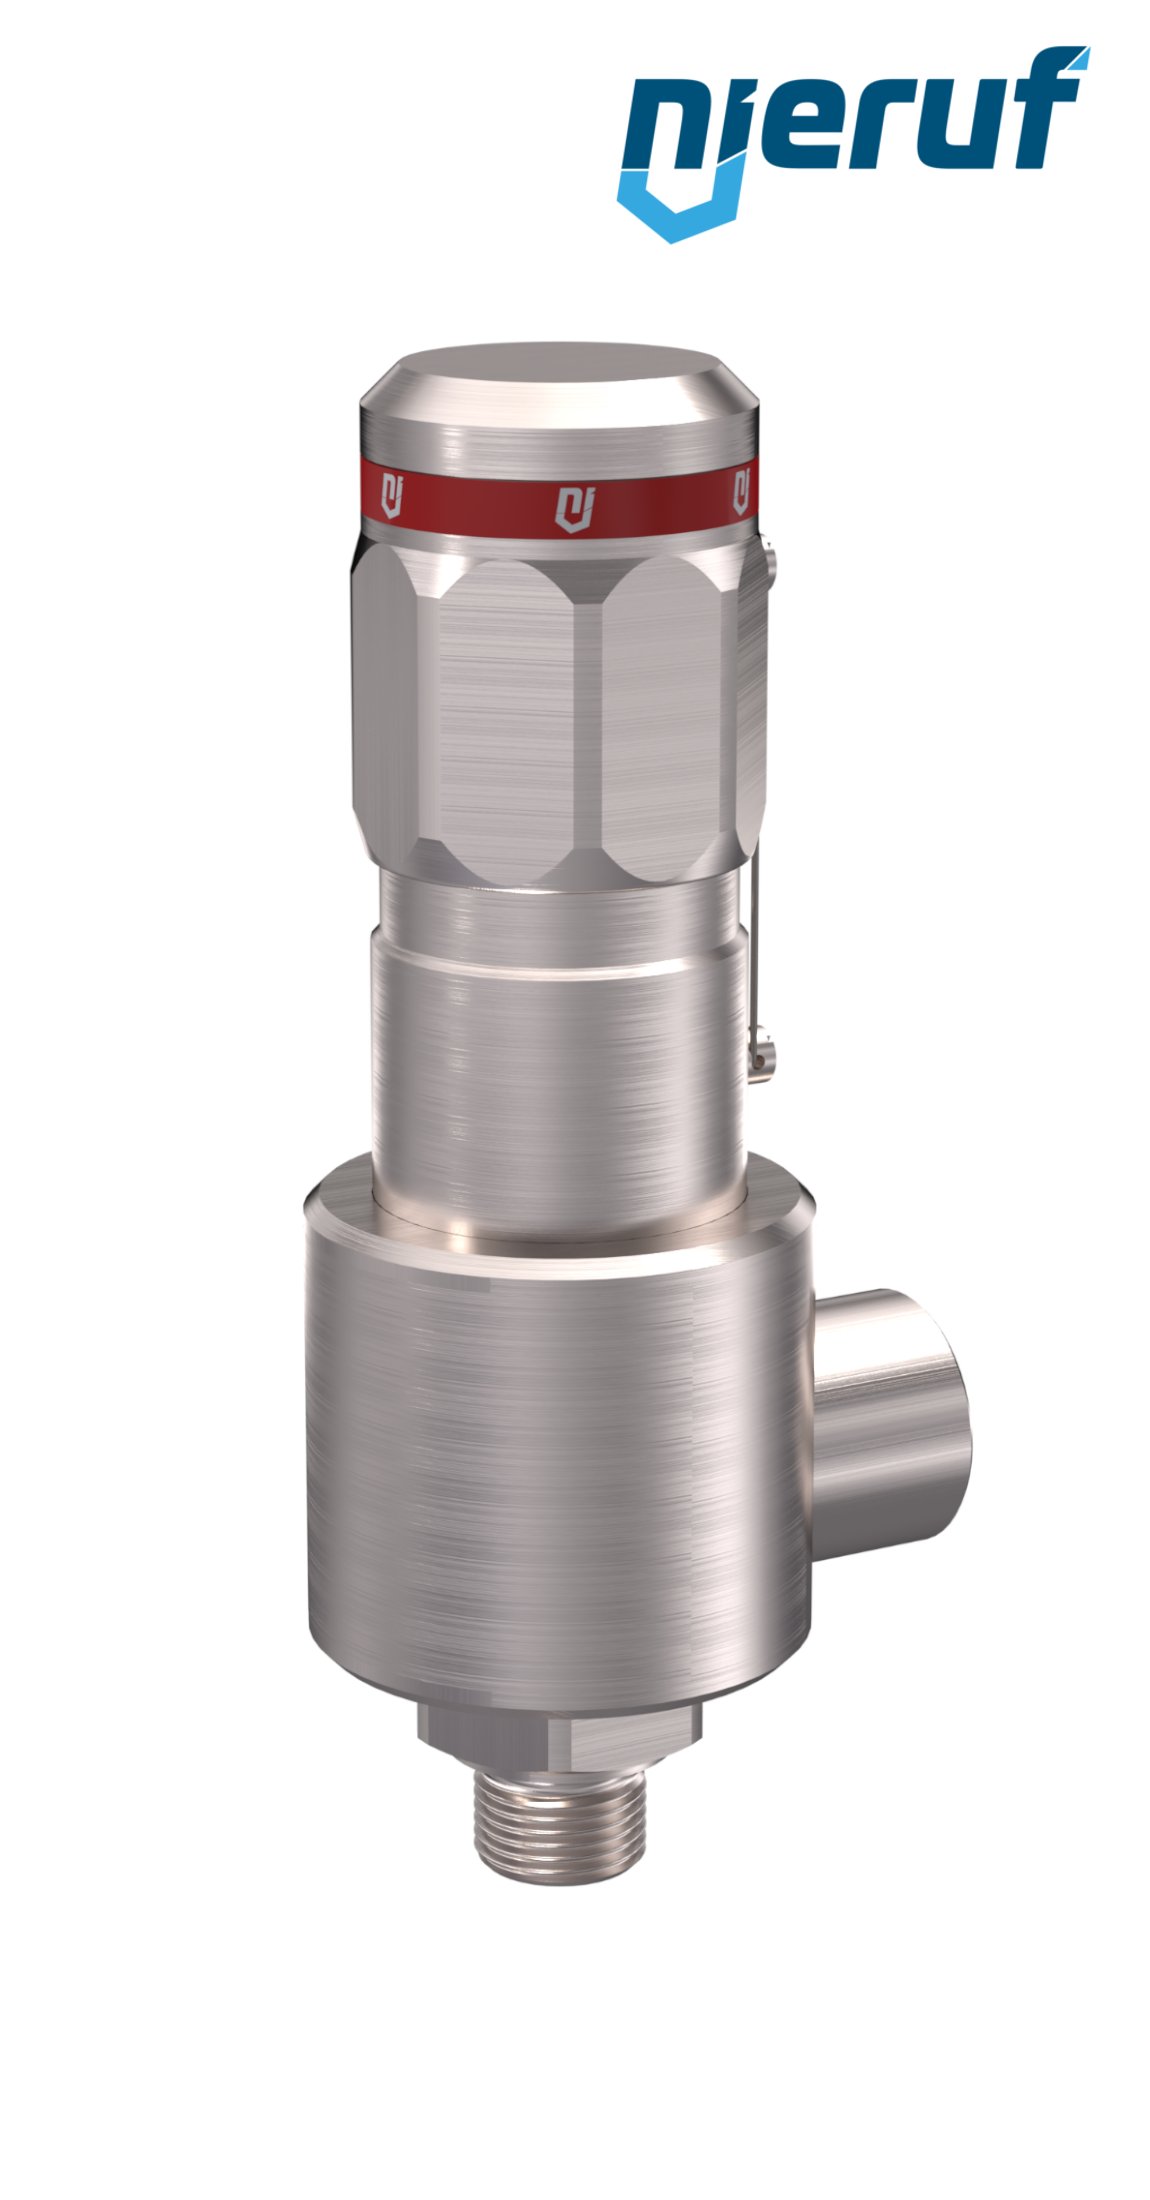 safety-valve DN6 1/2" m x 1/2" fm male thread NPT, SV15, MD/ PEEK, without lifting device, angle-type, 150,0 - 500,0 bar